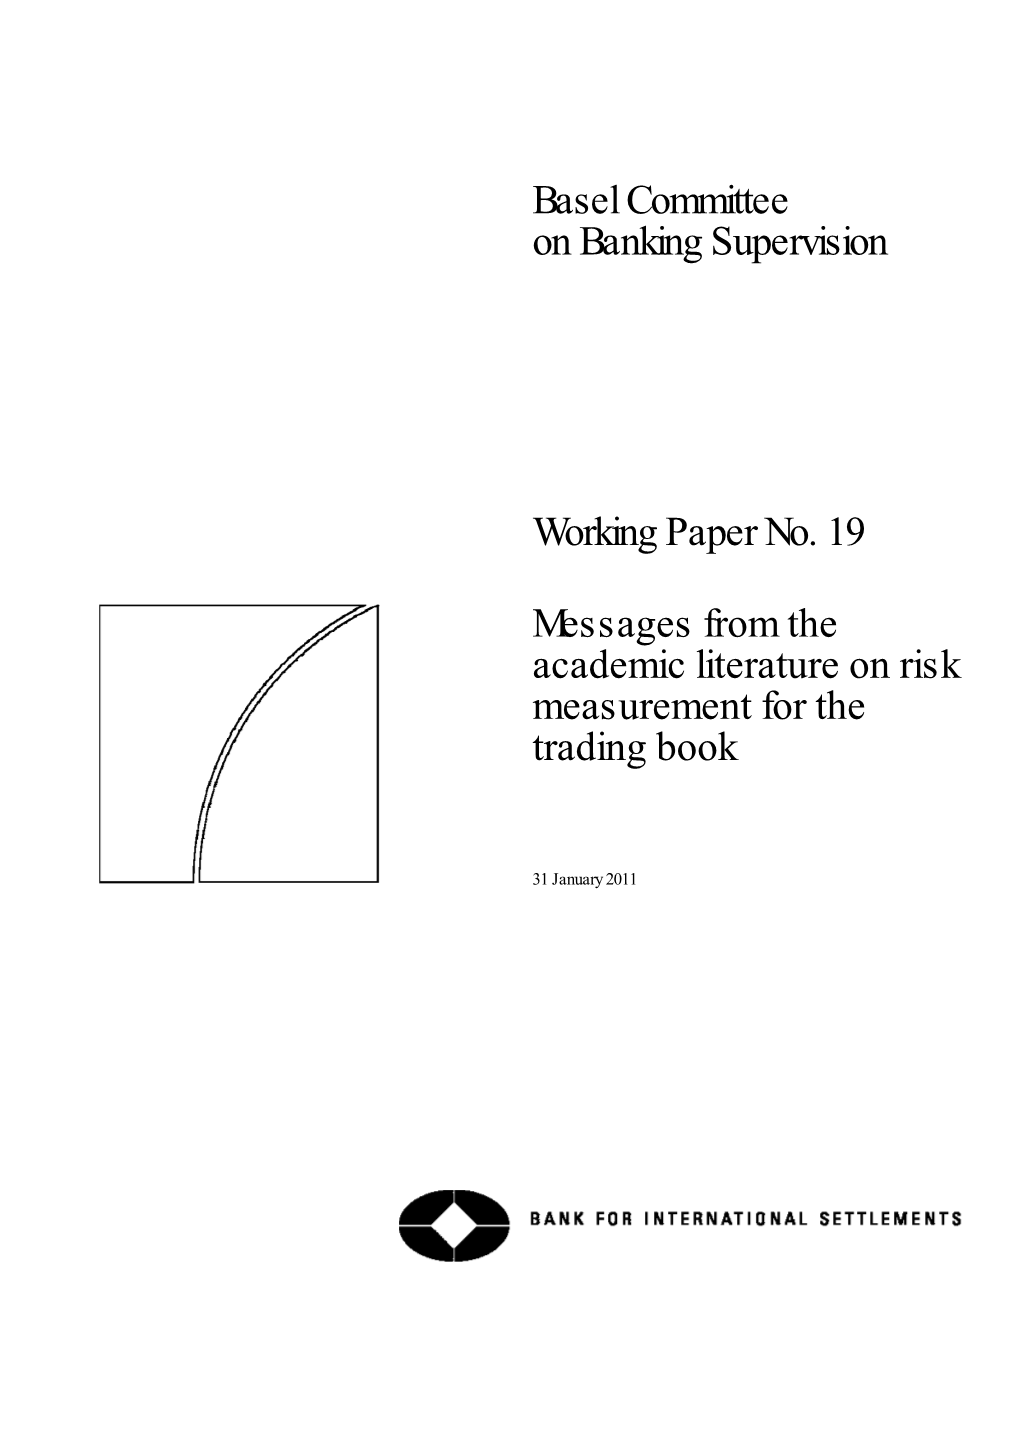 Messages from the Academic Literature on Risk Measurement for the Trading Book